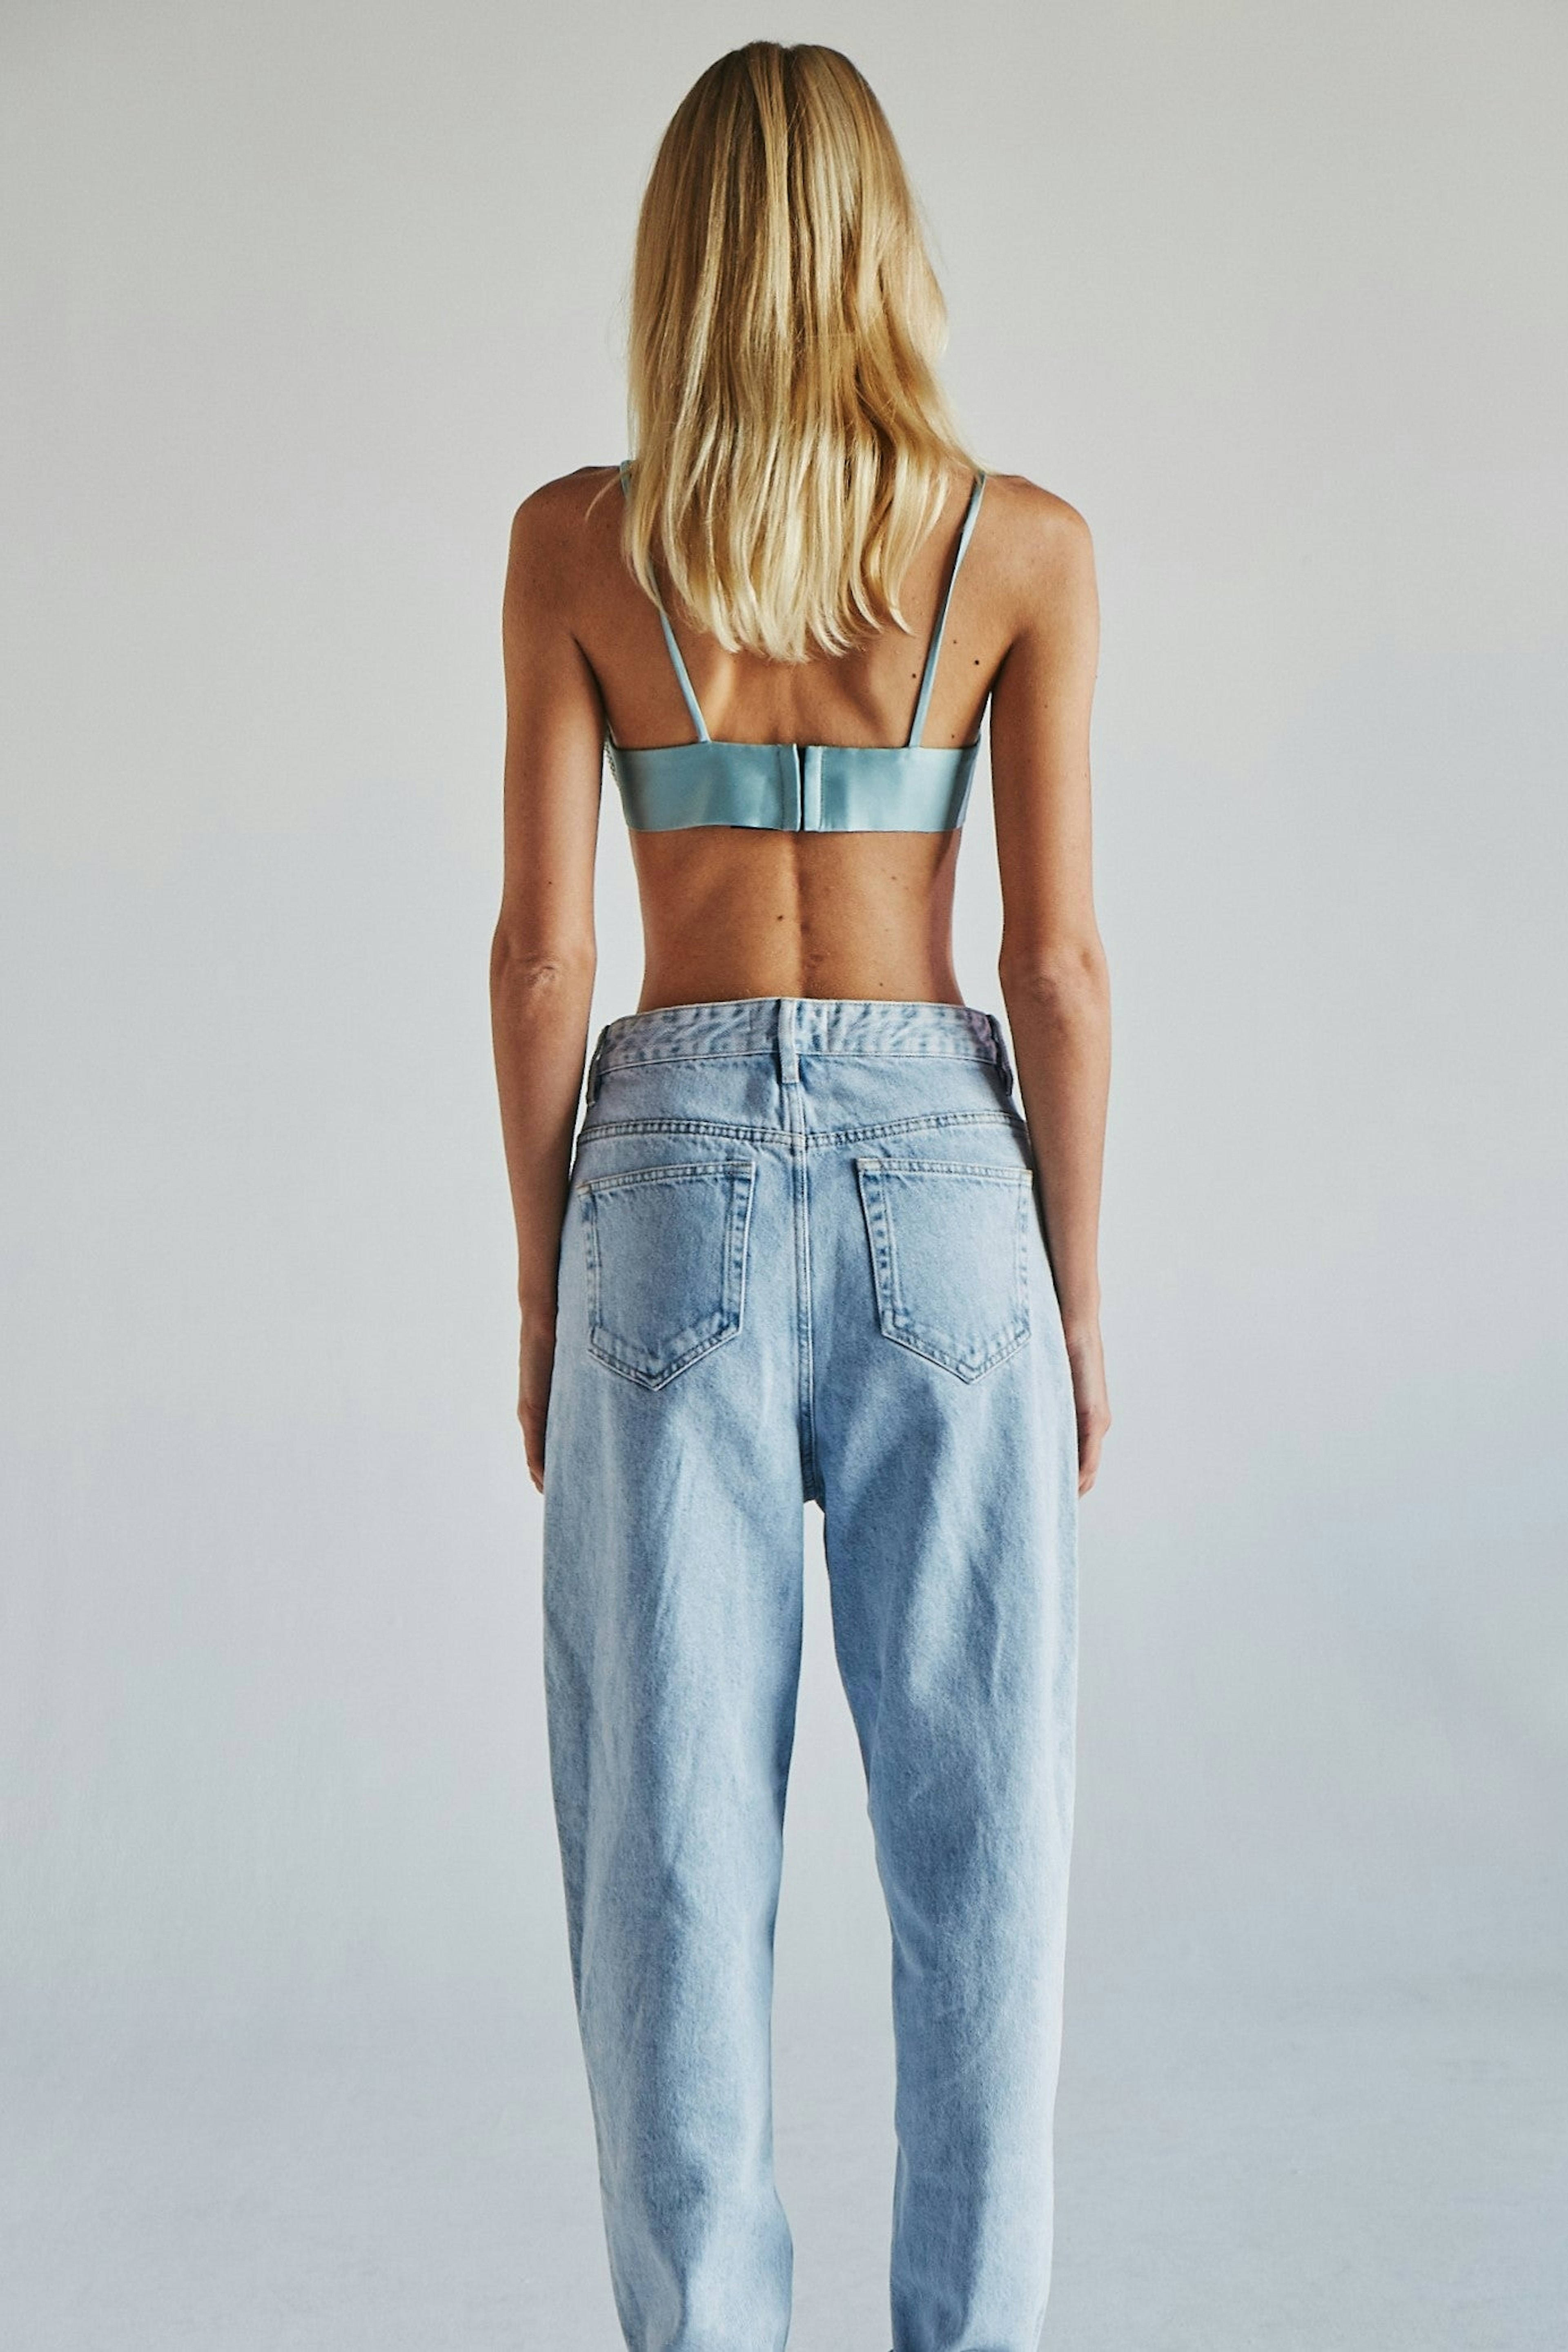 Shop The Heart Bralette - Blue from Romani at Seezona